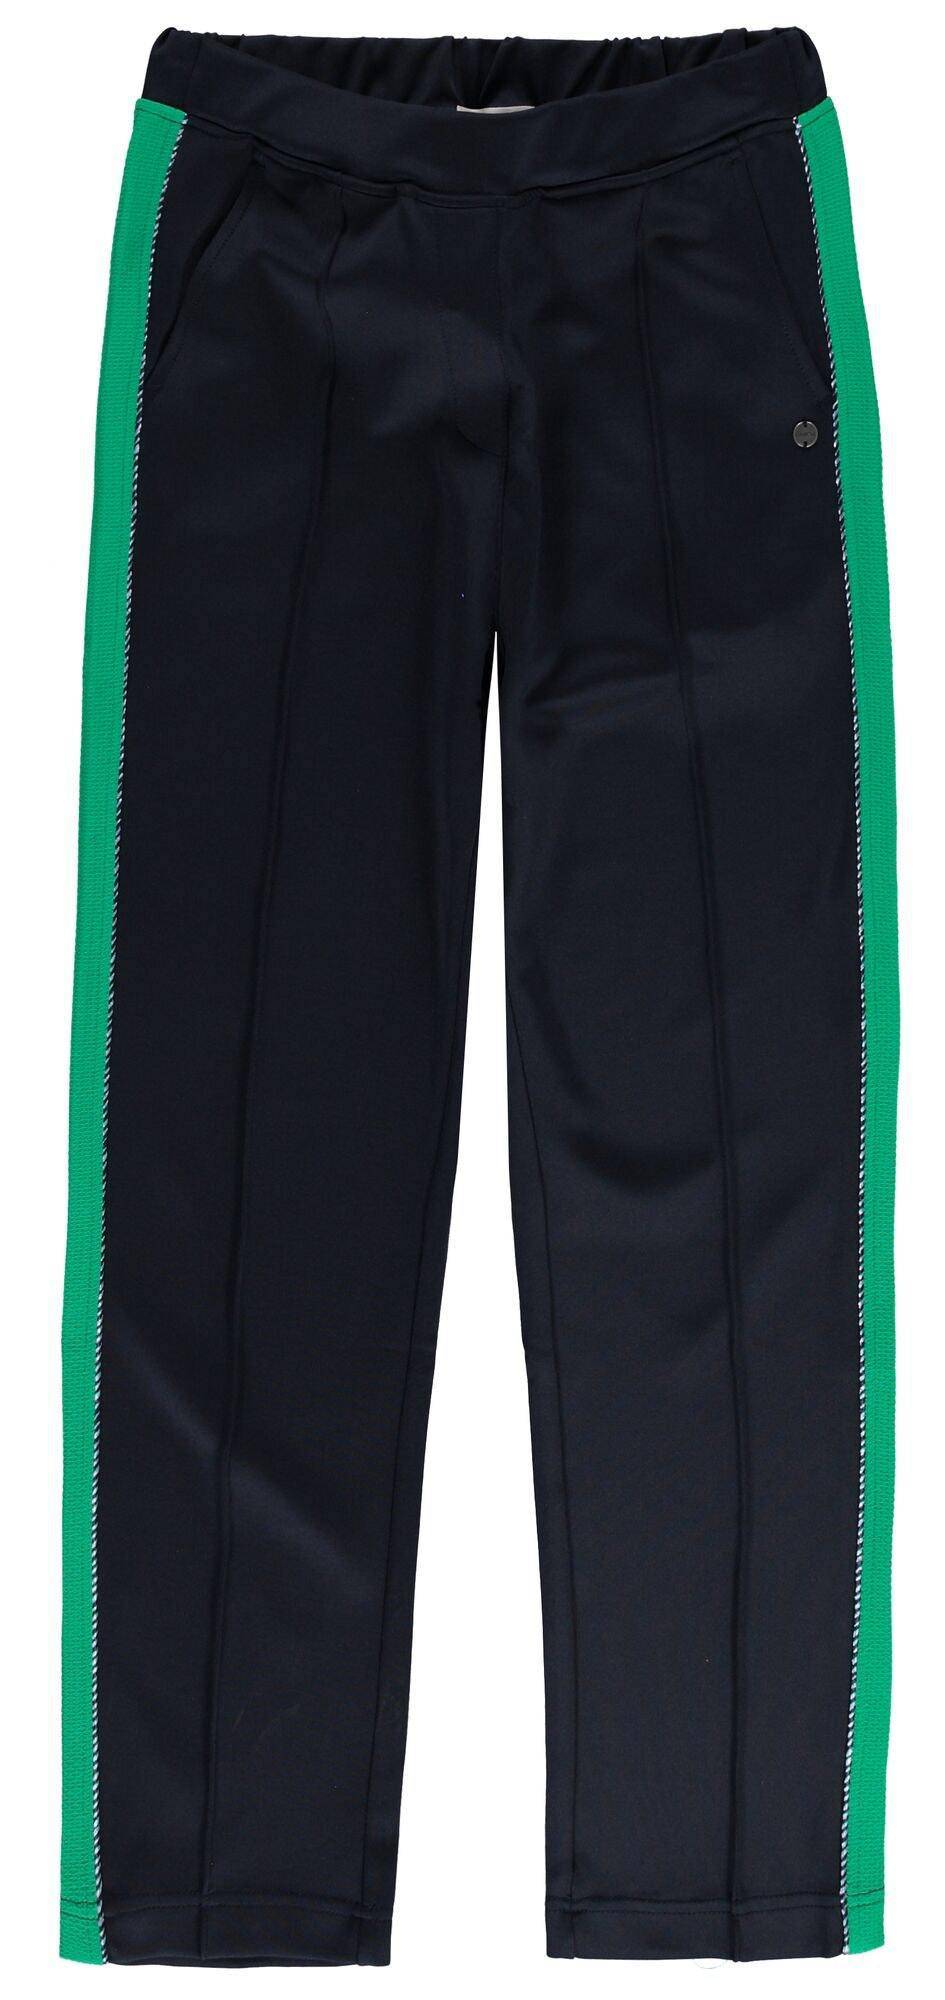 Black Garcia Trousers with Green Stripe - Your Style Your Story